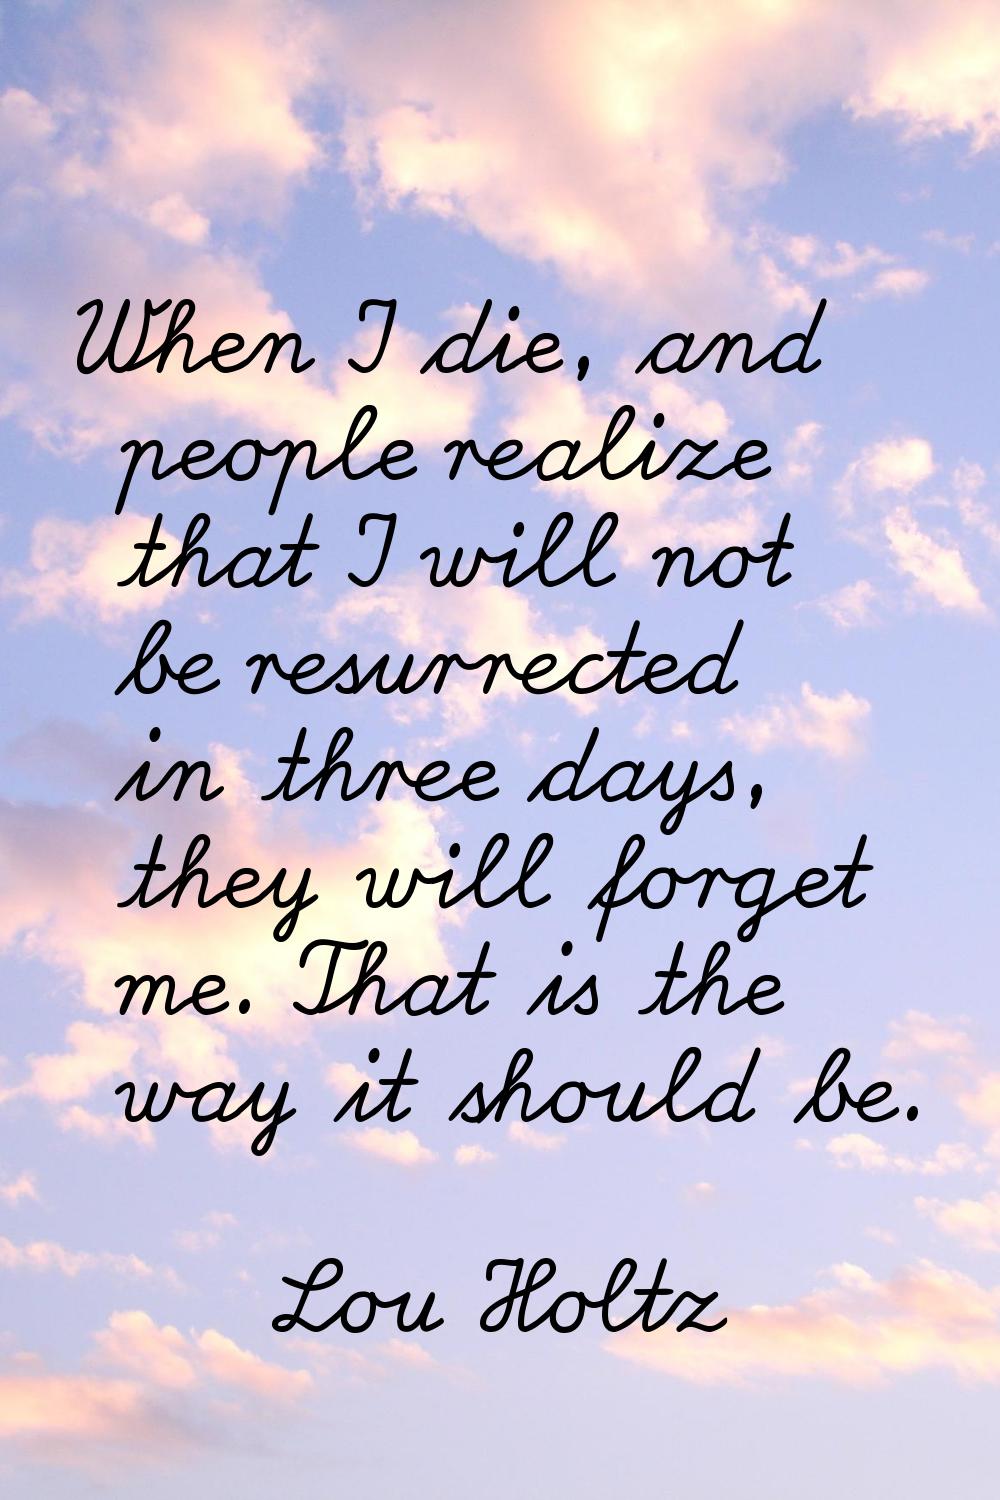 When I die, and people realize that I will not be resurrected in three days, they will forget me. T